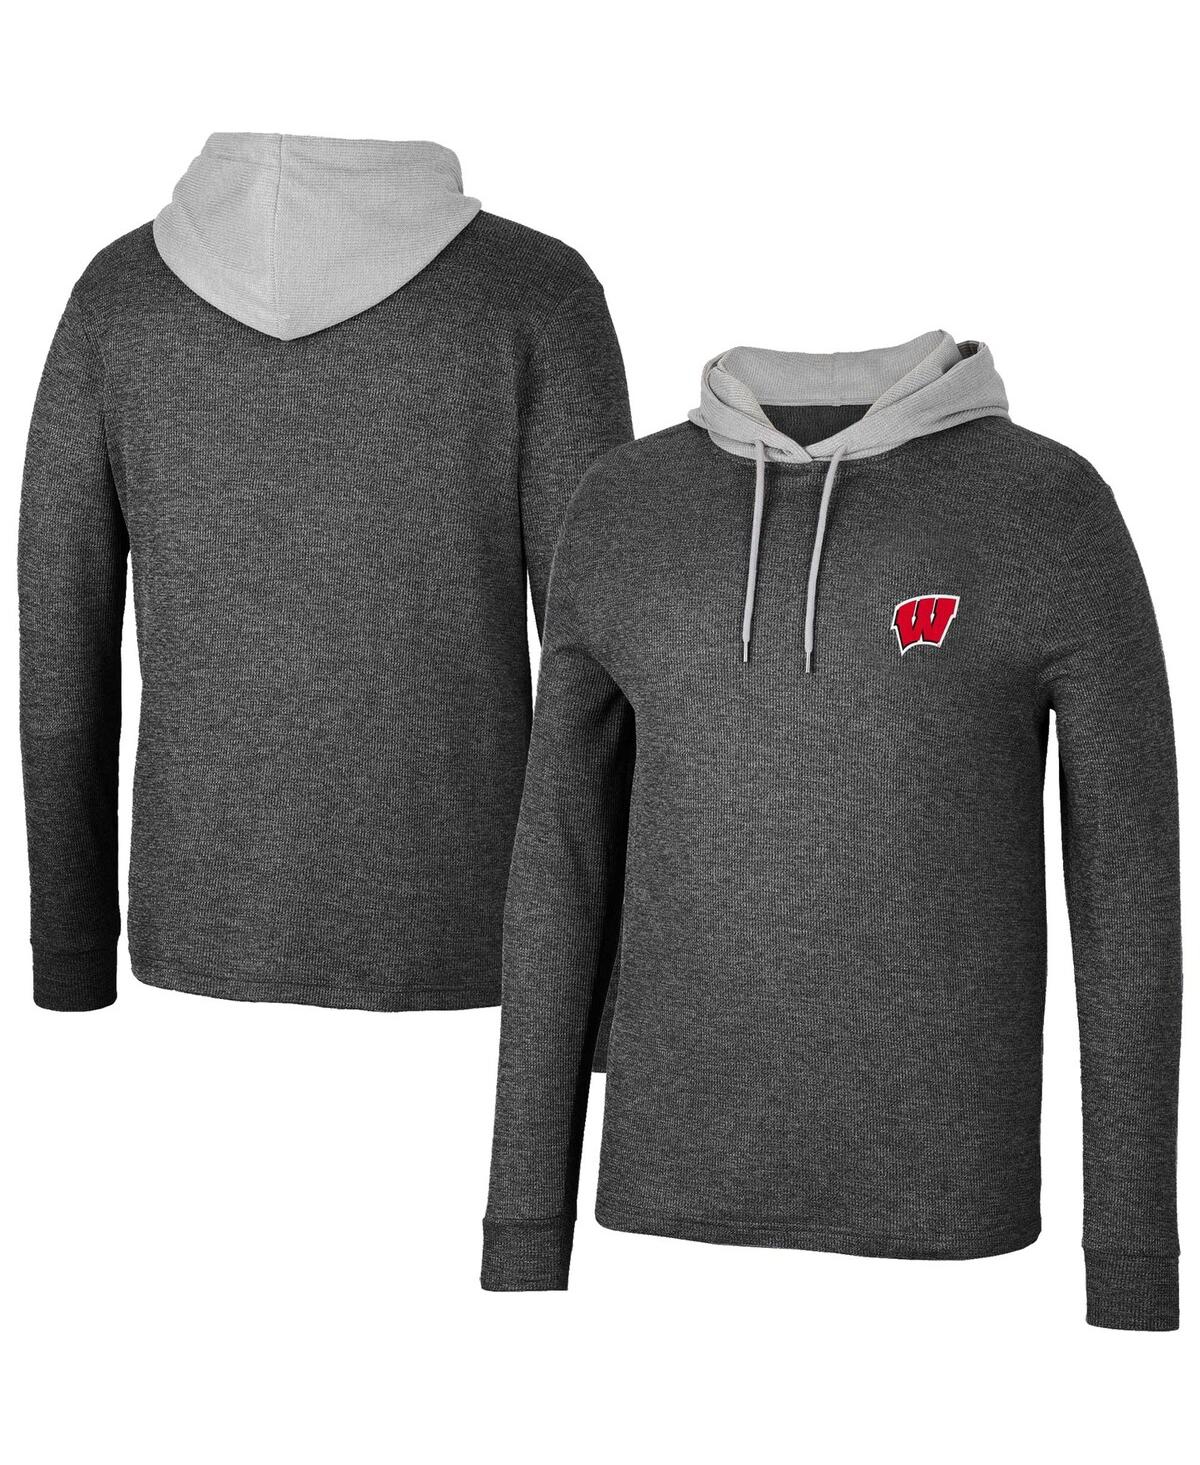 Men's Colosseum Black Wisconsin Badgers Ballot Waffle-Knit Thermal Long Sleeve Hoodie T-shirt - Black